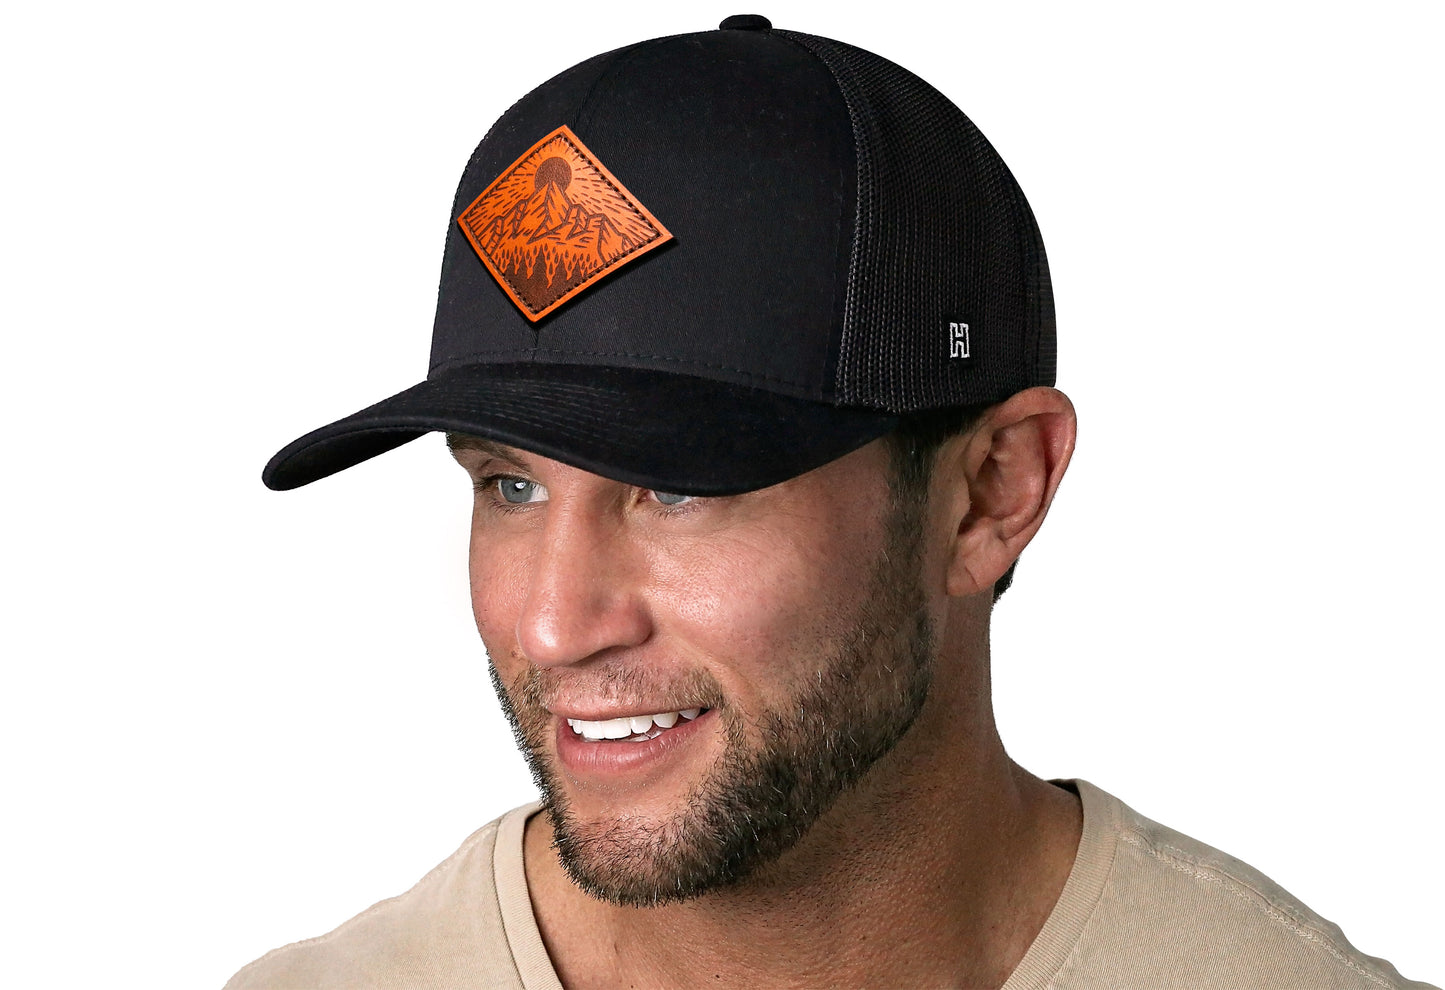 Mountains and Trees Trucker Hat Leather  |  Black Outdoors Snapback